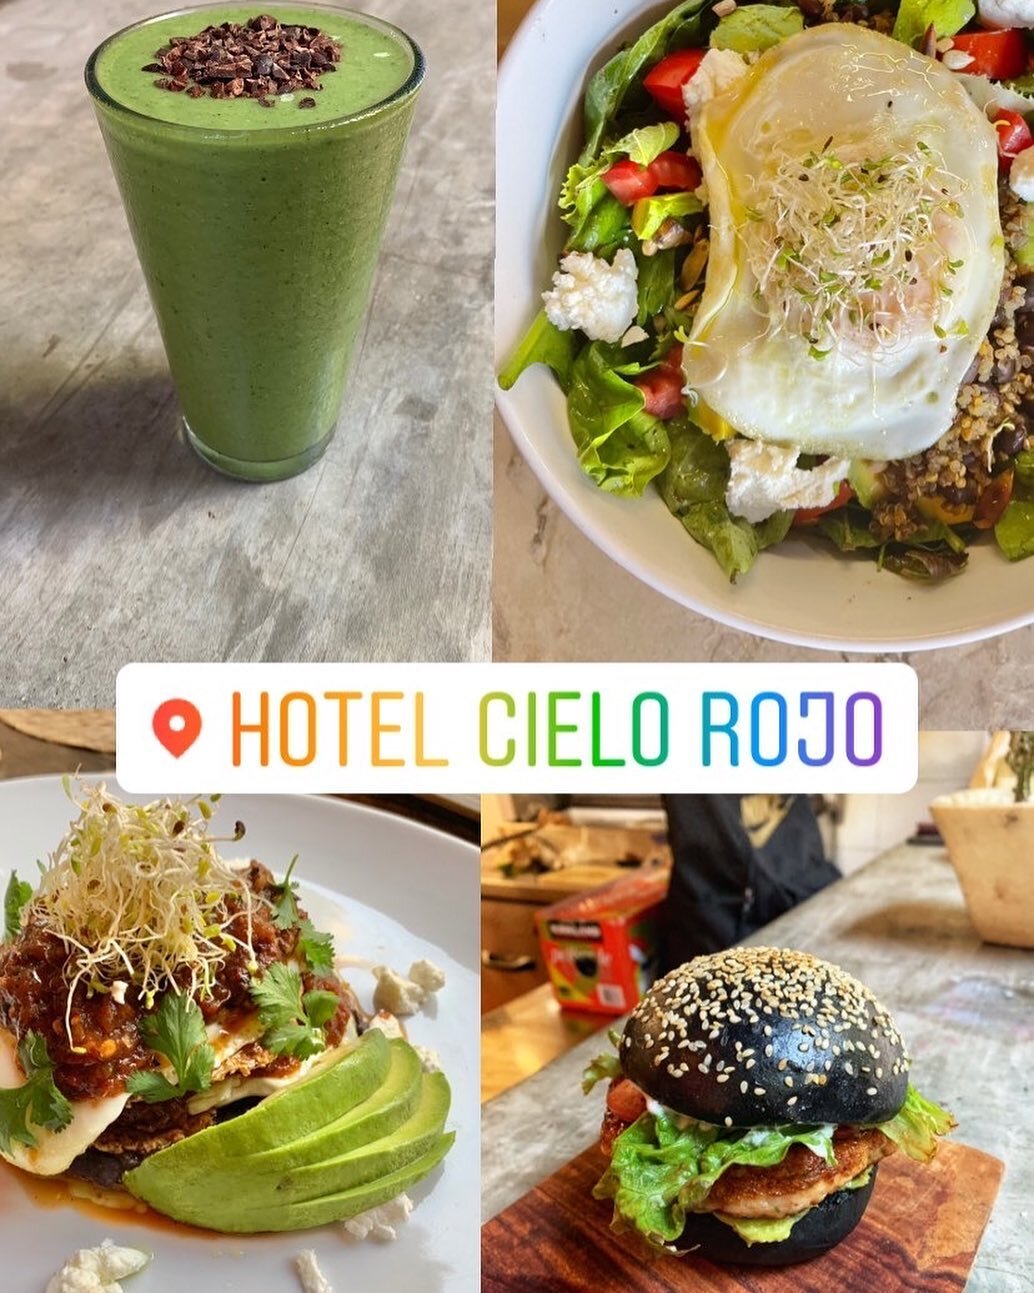 Food is an important part of Hotel Cielo Rojo. Food that is organic, and local and embodies Mexico in unique ways.
..
..
..
..
..
#sanpancho #rivieranayarit #sanpanchonayarit #organic #organicmexico #avocadorecipes #huevosrancheros #greendrinks #shri